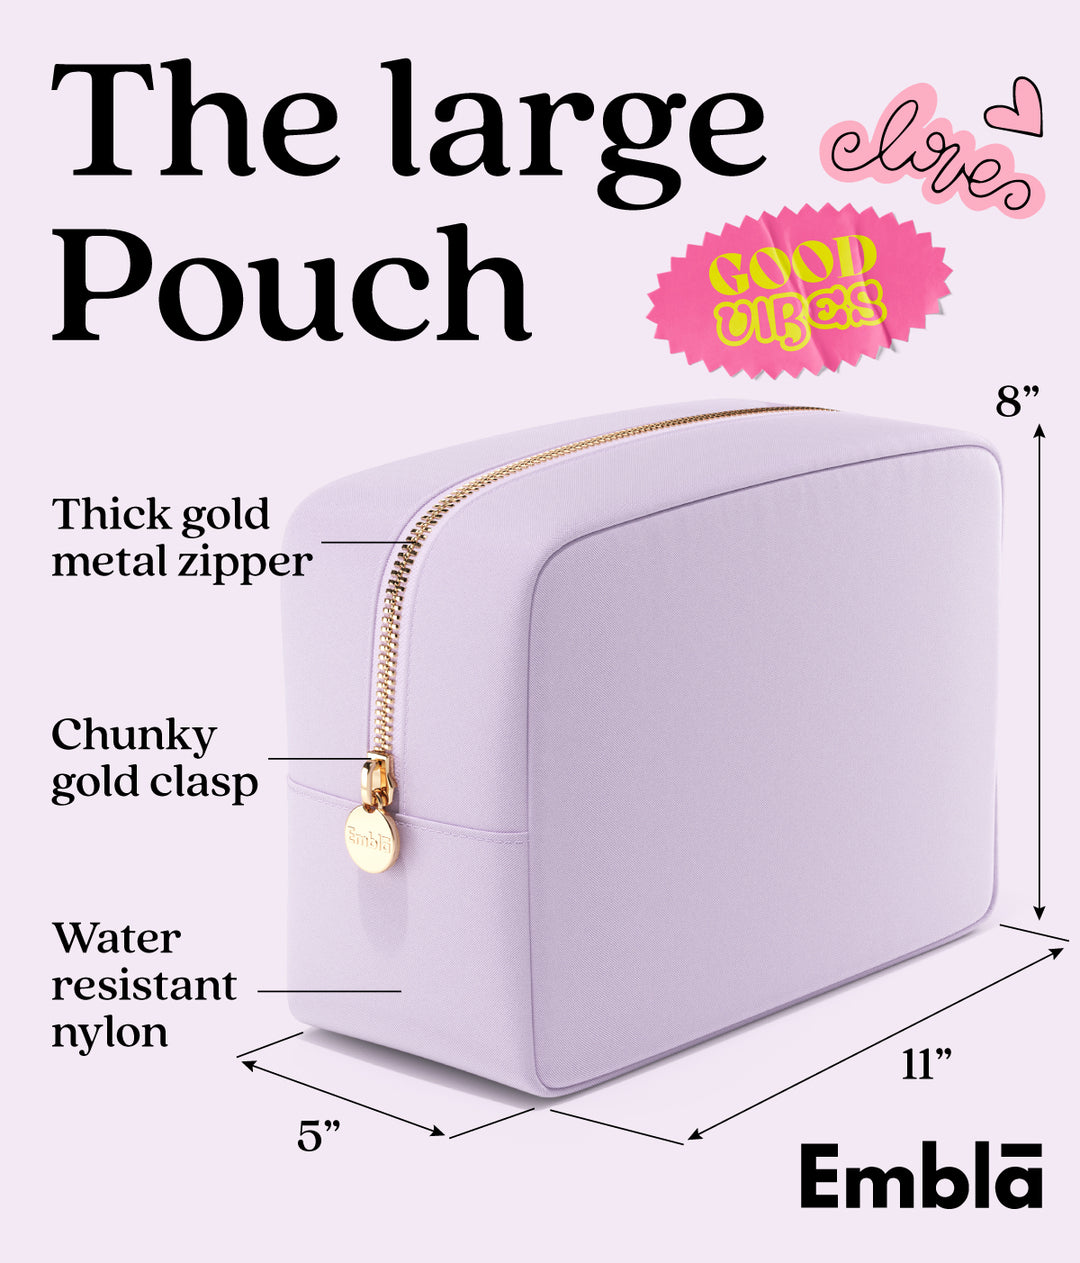 The Large Lilac Pouch